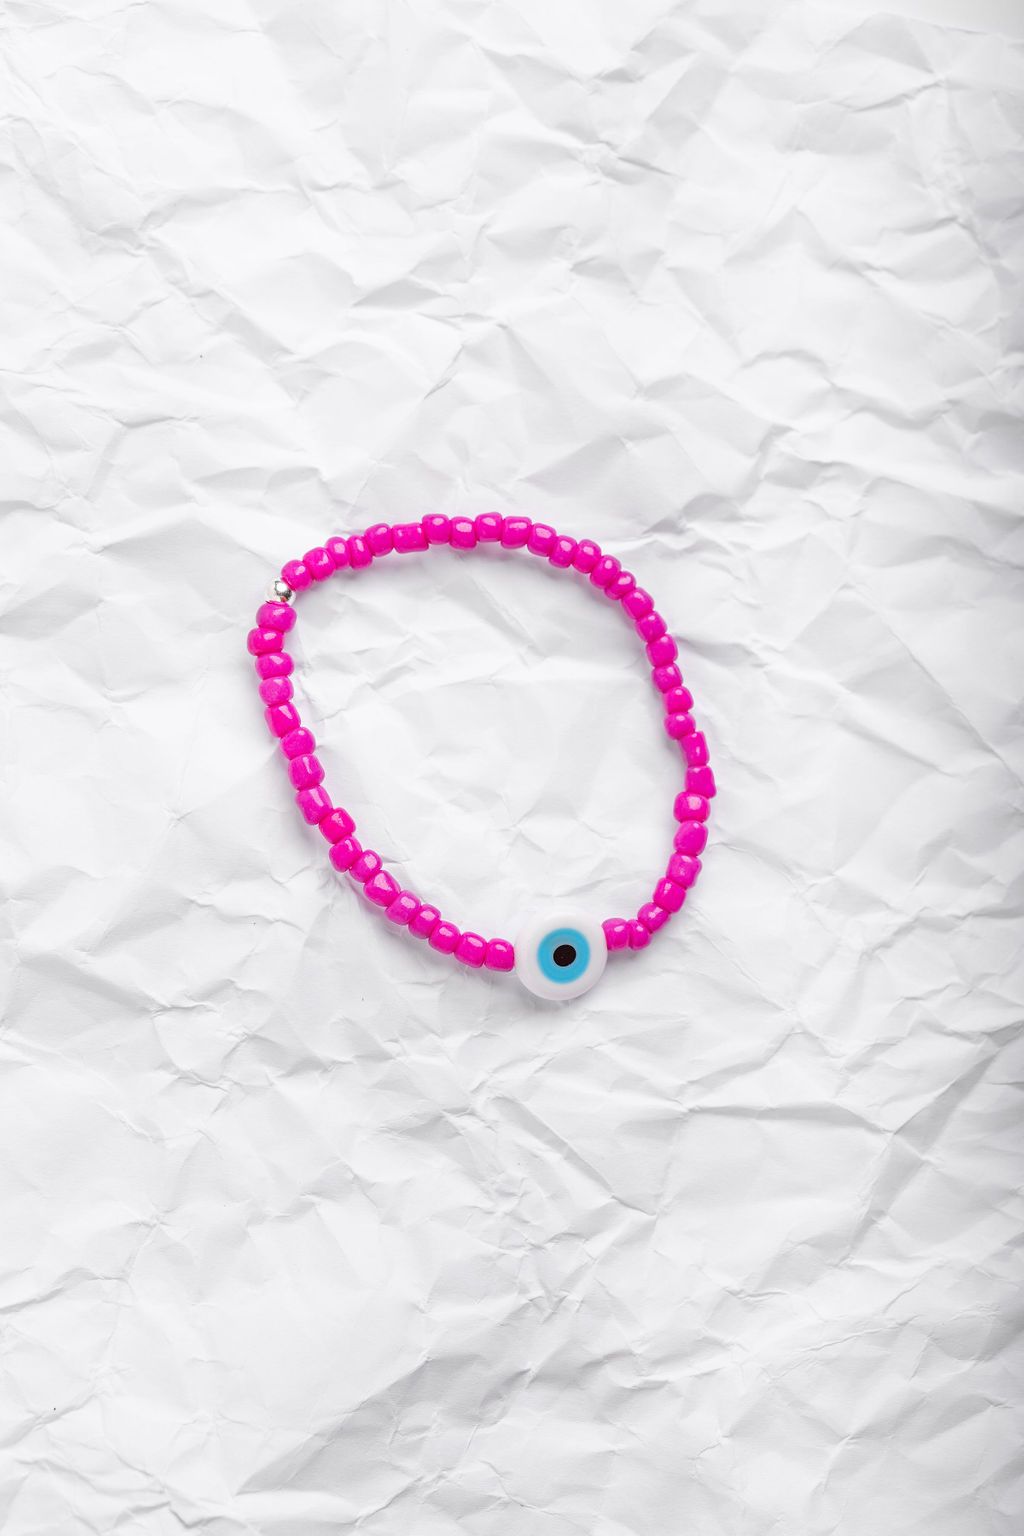 Neon pink Japanese glass beads on sturdy elastic. For that little pop of color and protection for your personal space bubble. Wear just one or stack 'em.